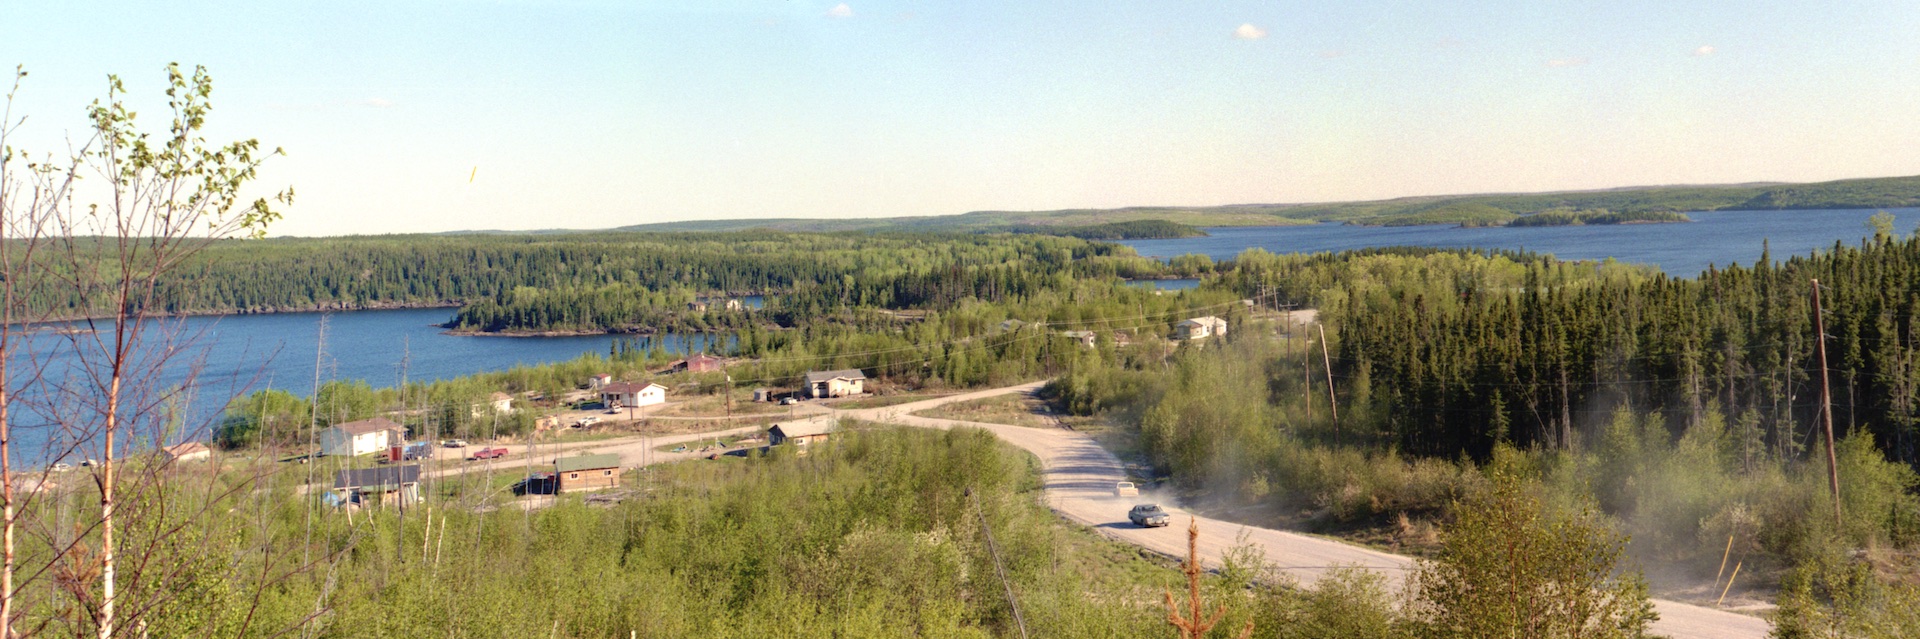 Scenic hilltop view of a part of the community of Deer Lake, Ontario.